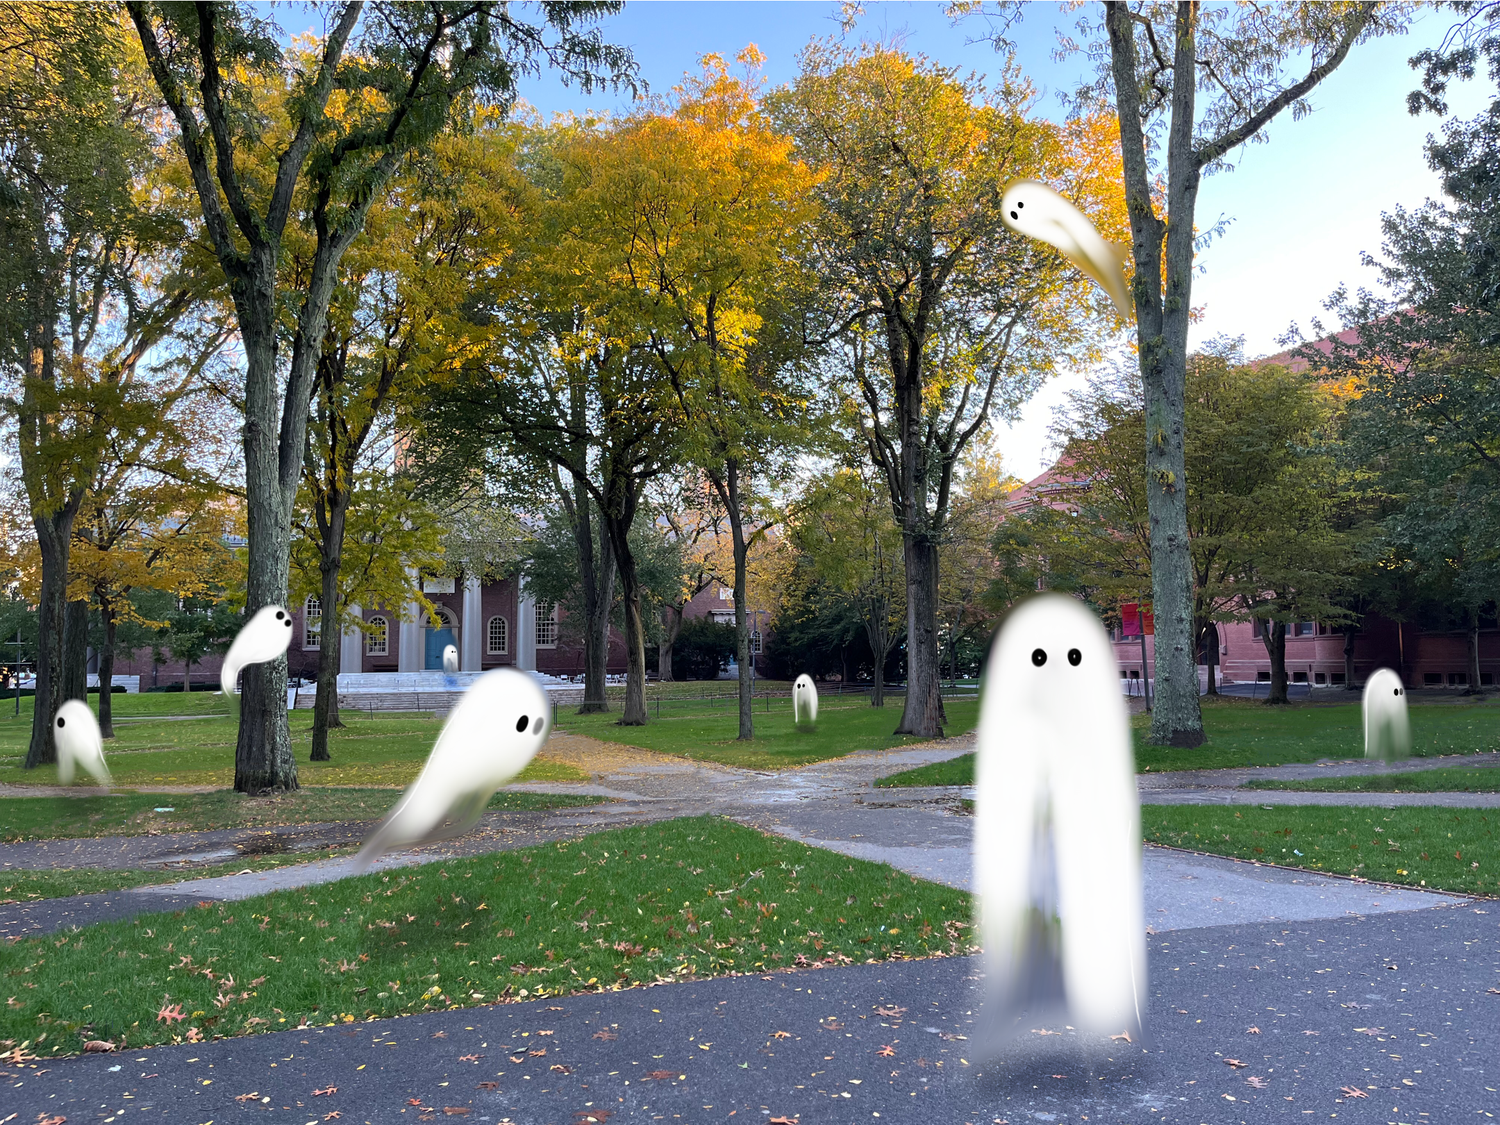 Harvard’s long and storied history brings with it a number of paranormal figures, seen now for centuries in some of the 300-year-old buildings on campus.